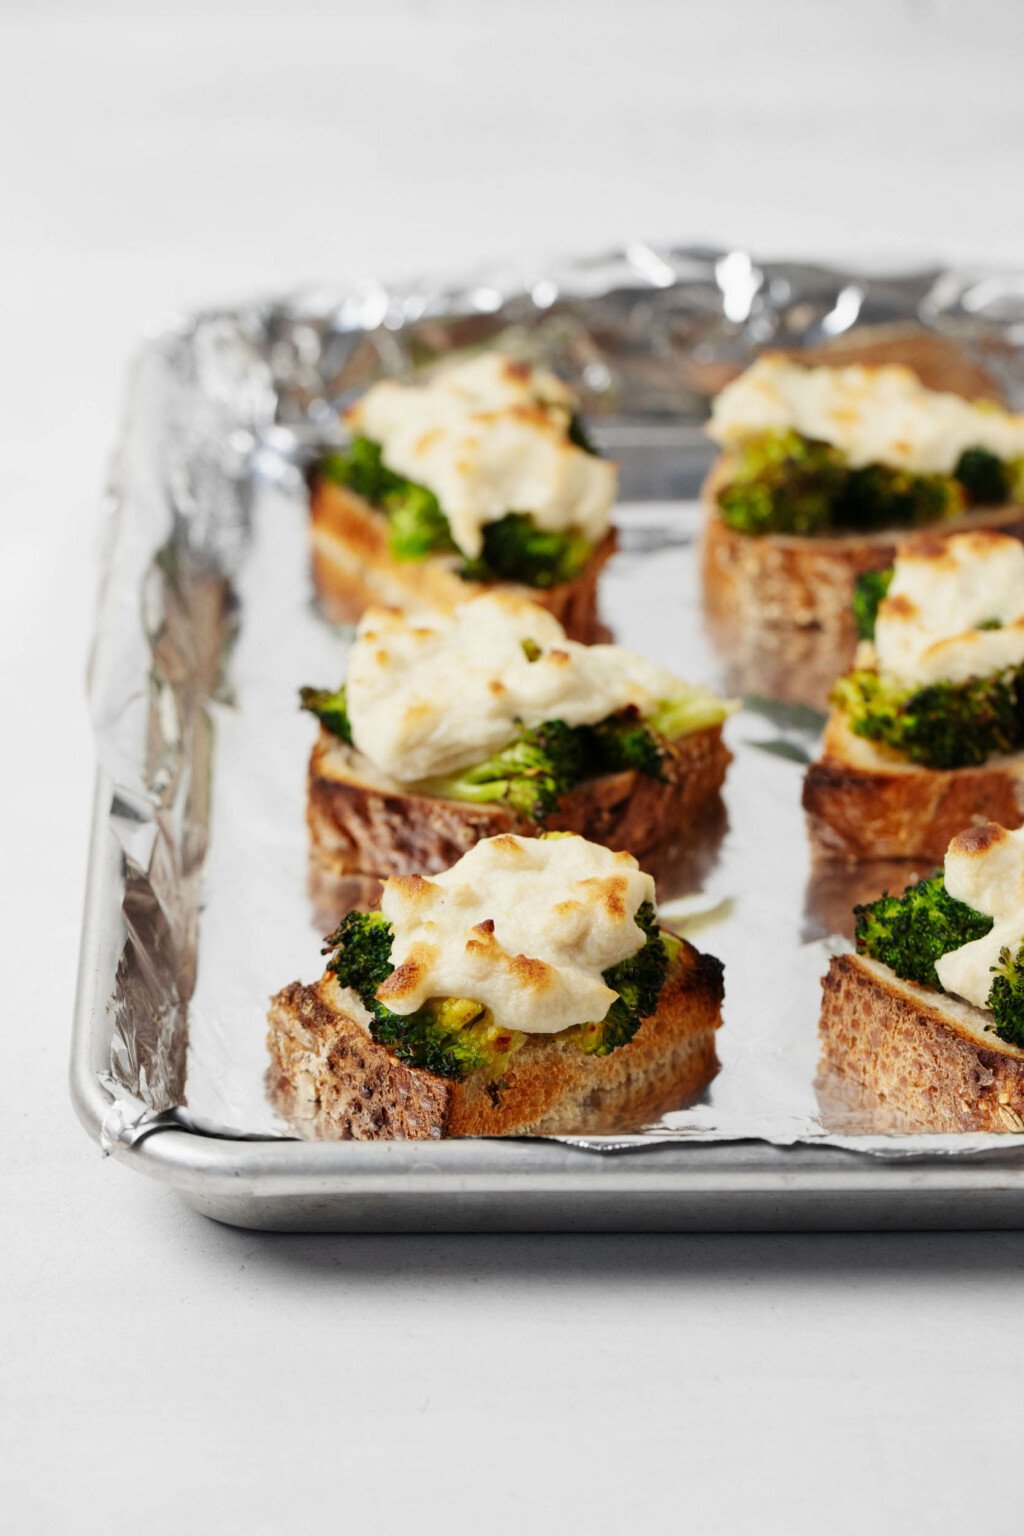 Slices of bread, each topped with cooked broccoli and toasted mozzarella cheese, are lined with foil on a baking sheet.